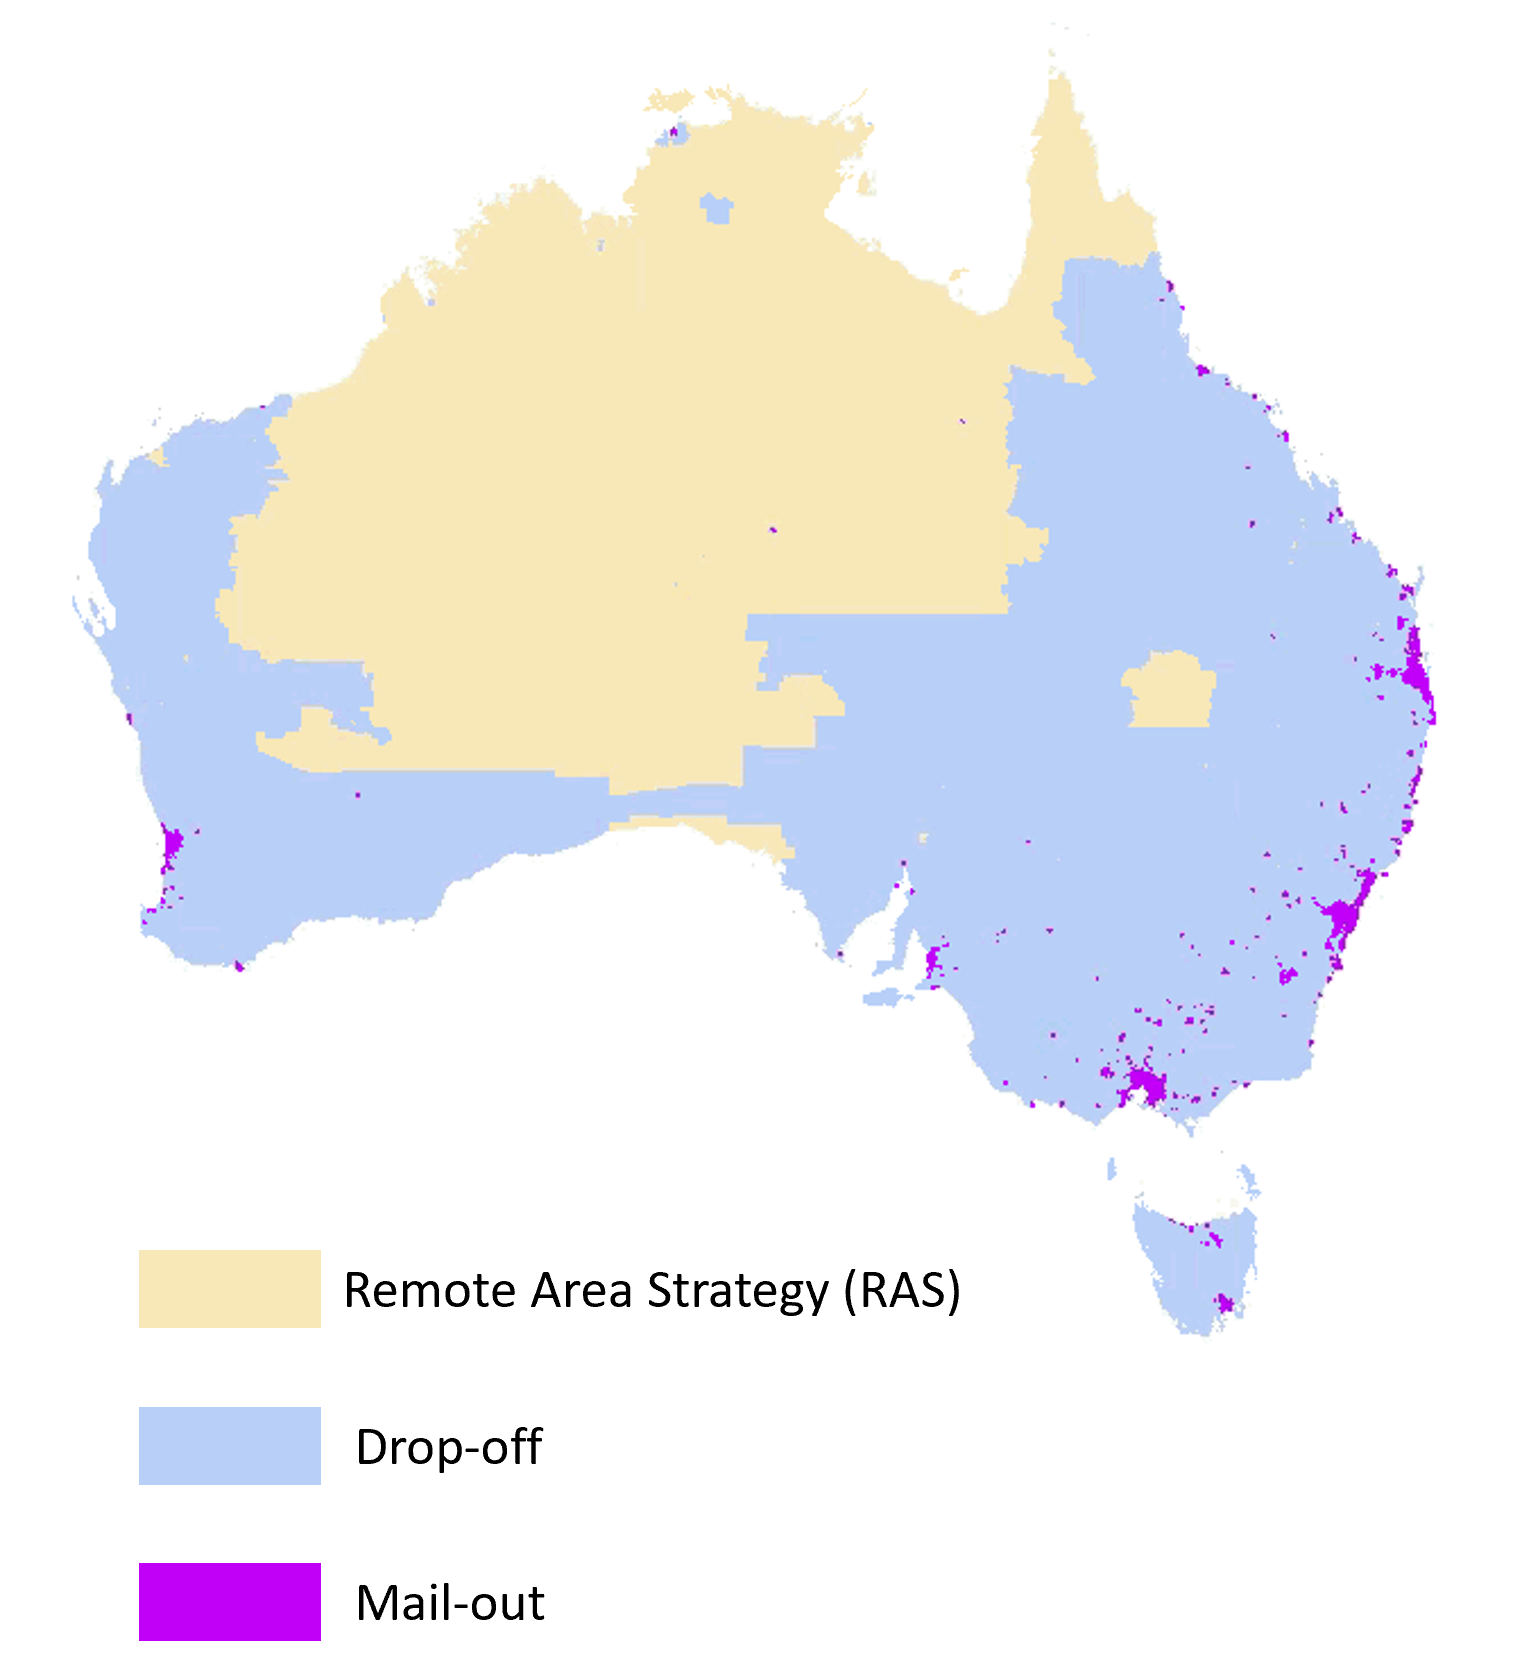 Map of Australia highlighting the Remote Area Strategy (RAS), Drop-off and Mail-out areas.